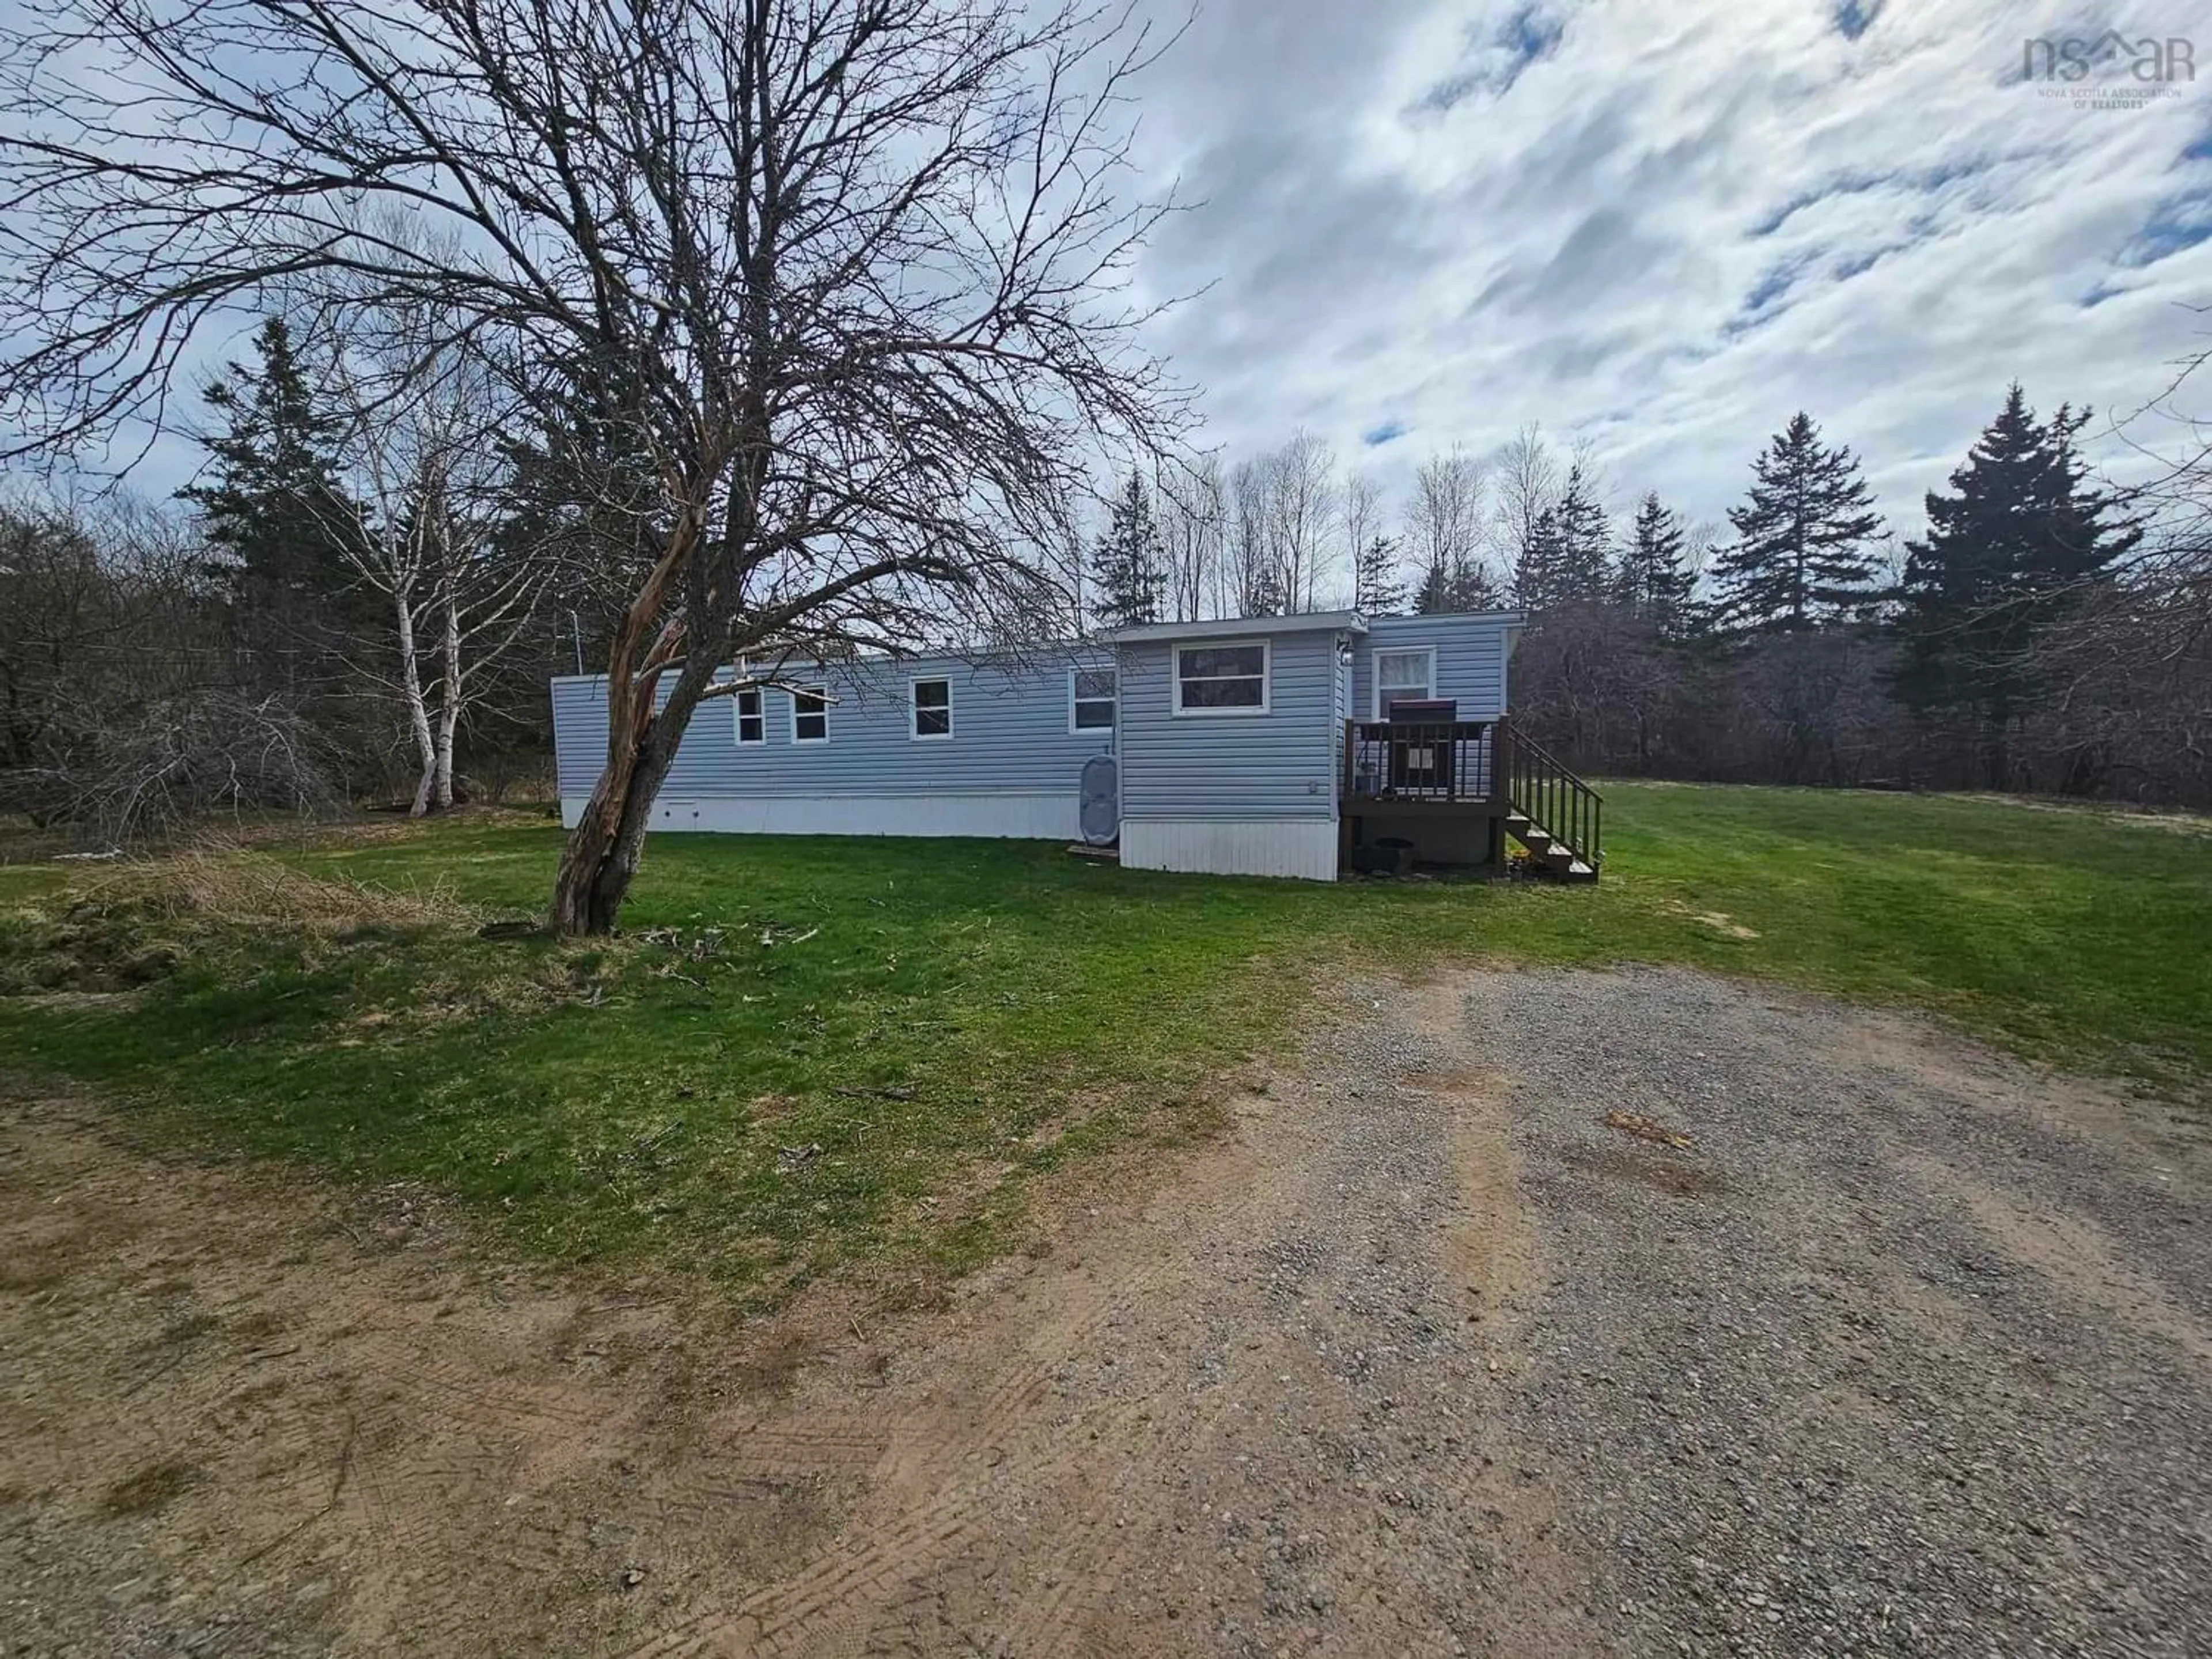 Shed for 25 Almon Rd, Georges River Nova Scotia B1Y 3J5